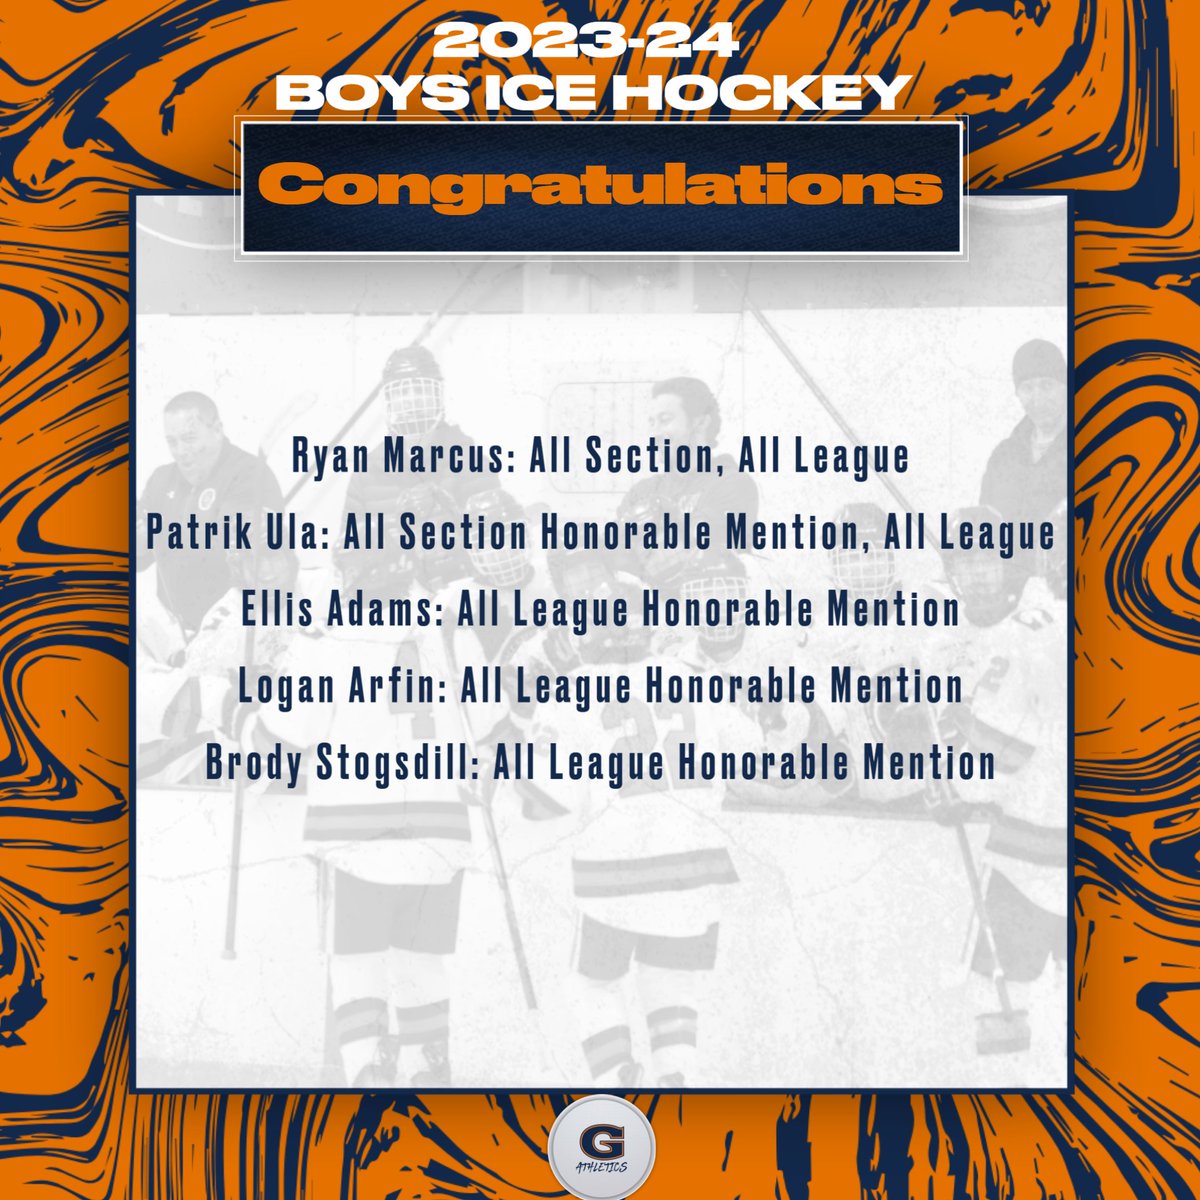 Join us in celebrating post-season honors for our 2023-24 boys ice hockey team! 
#GoGreeley #WeAreChappaqua